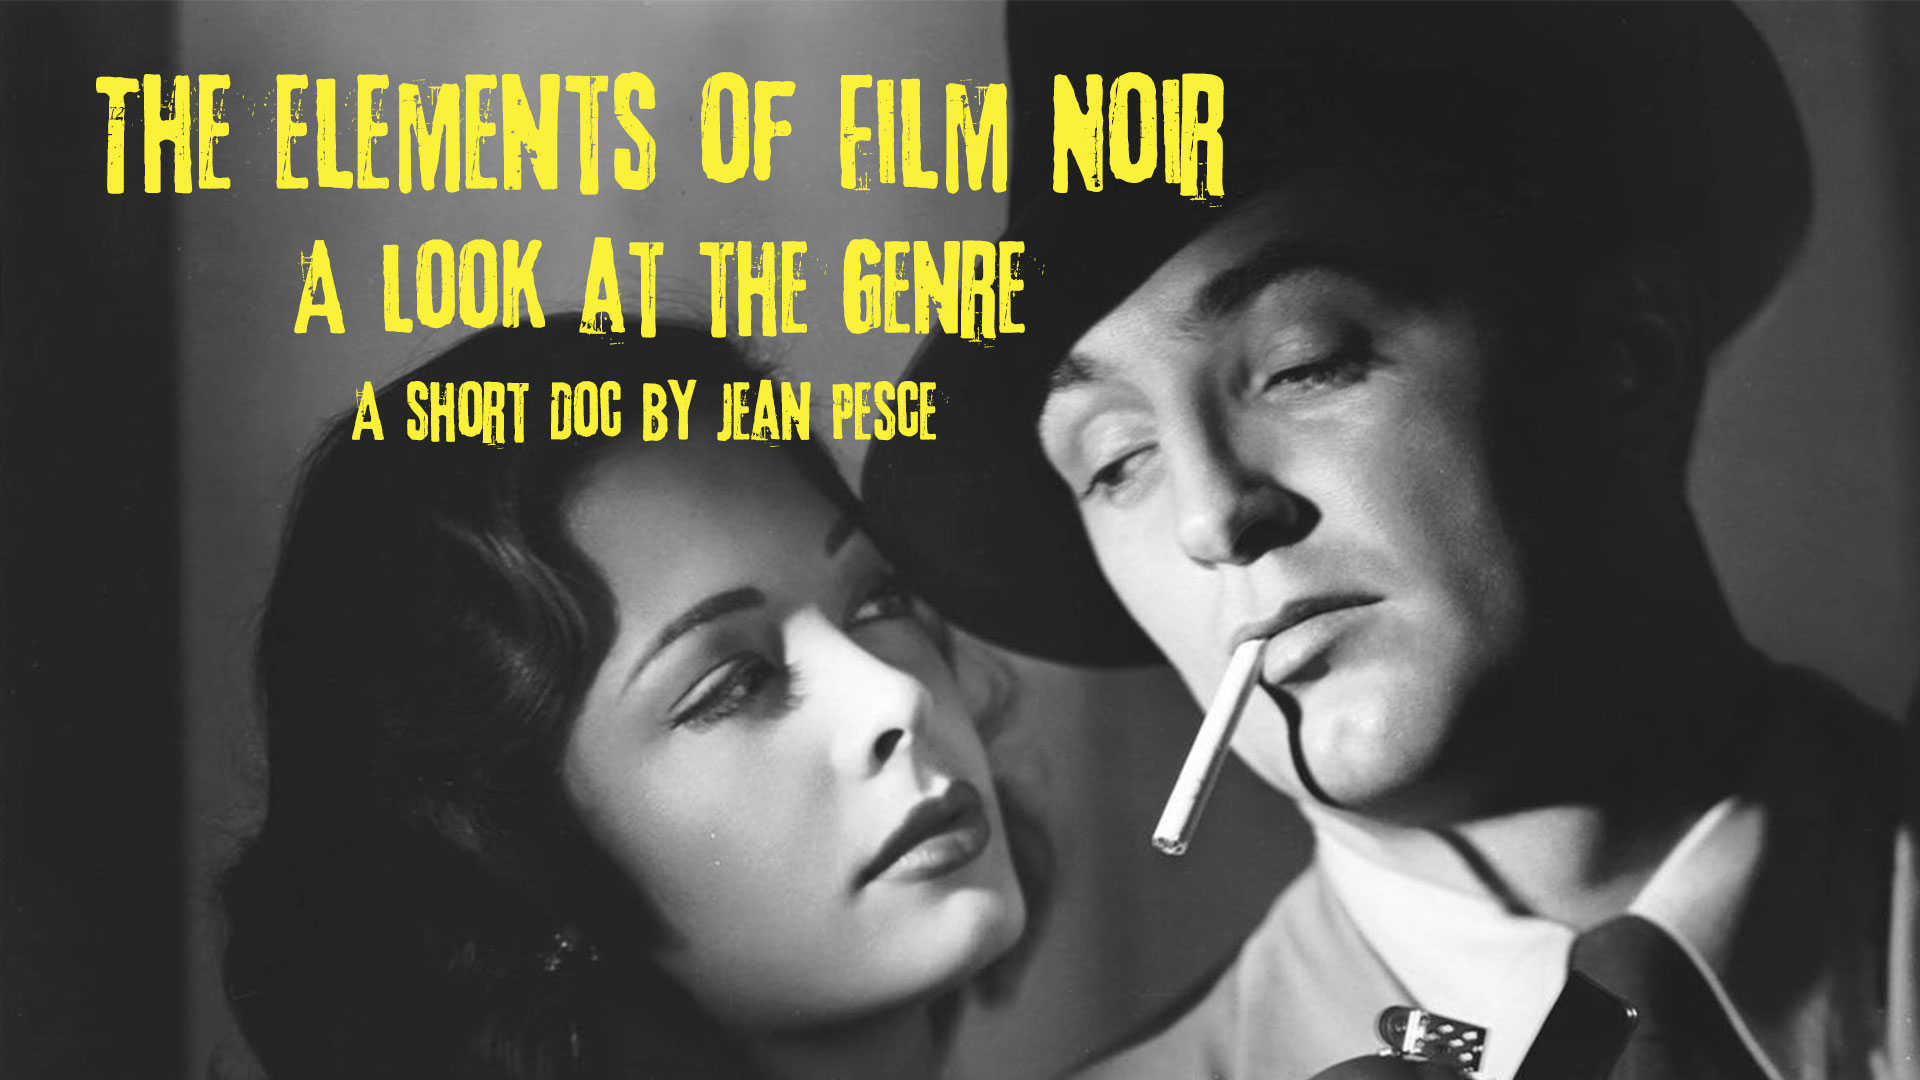 The Elements of Film Noir: A Look at the Genre